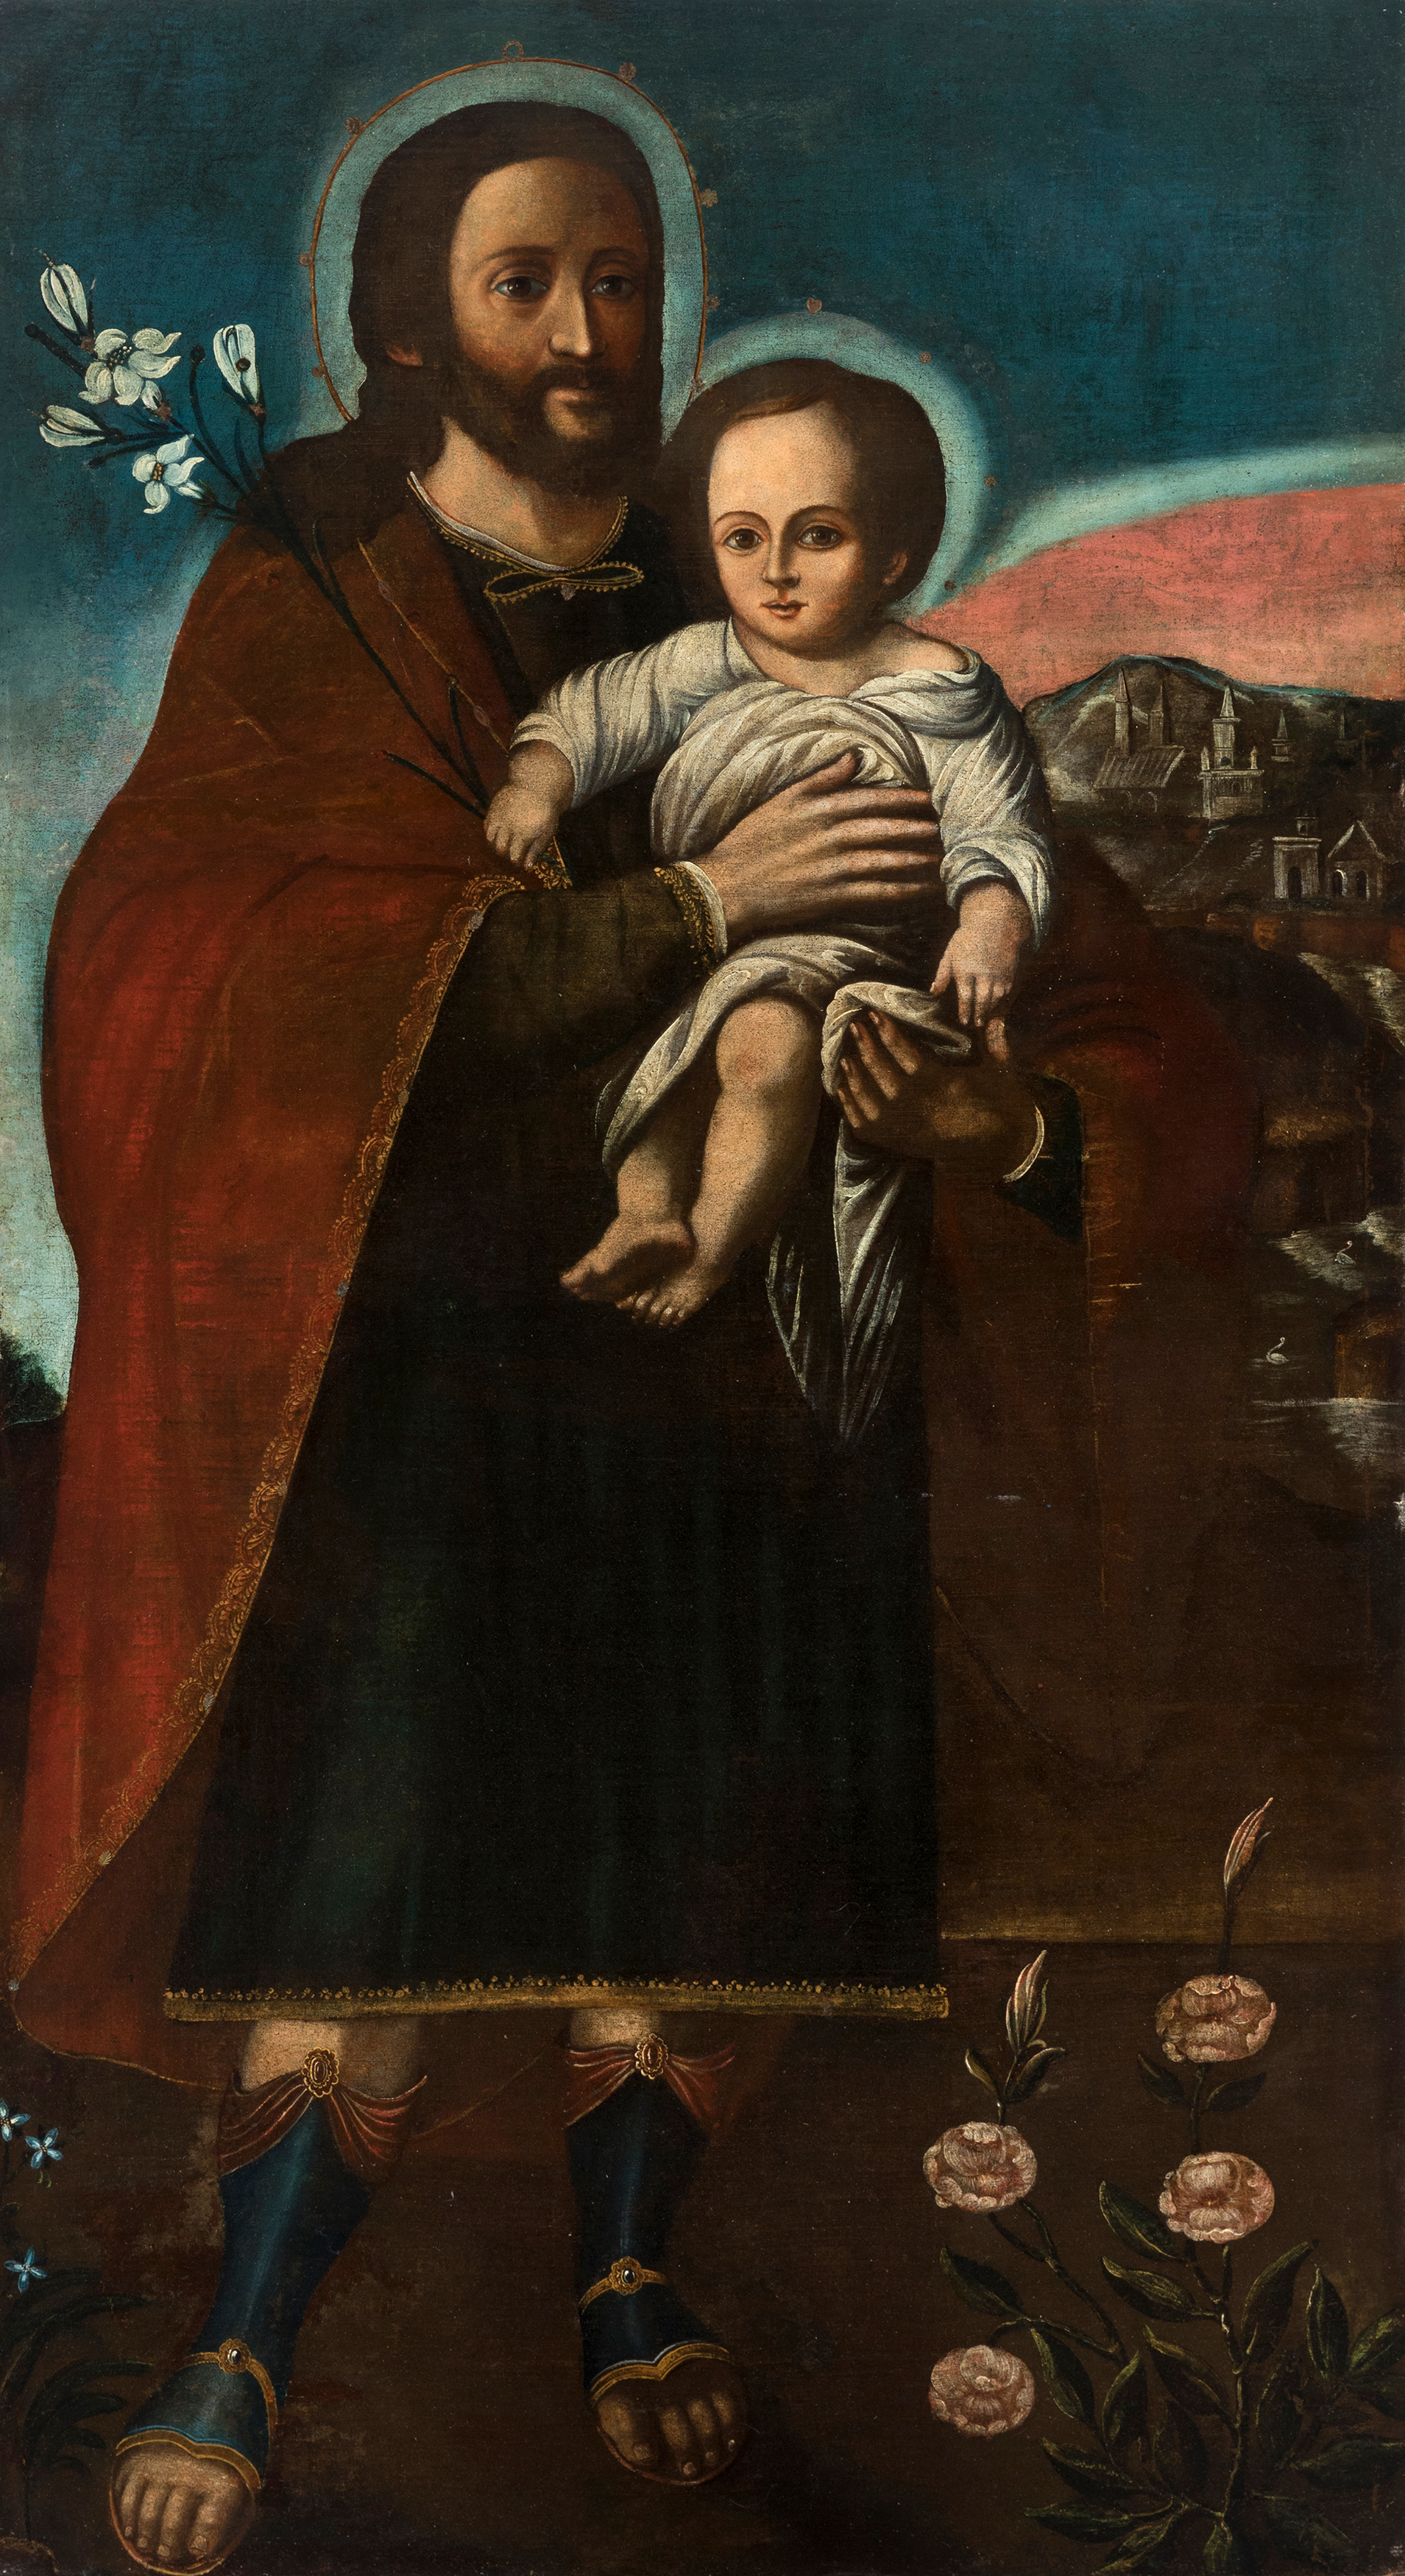 Peruvian colonial school; first half of the 18th century."Saint Joseph with Child".Oil on canvas.